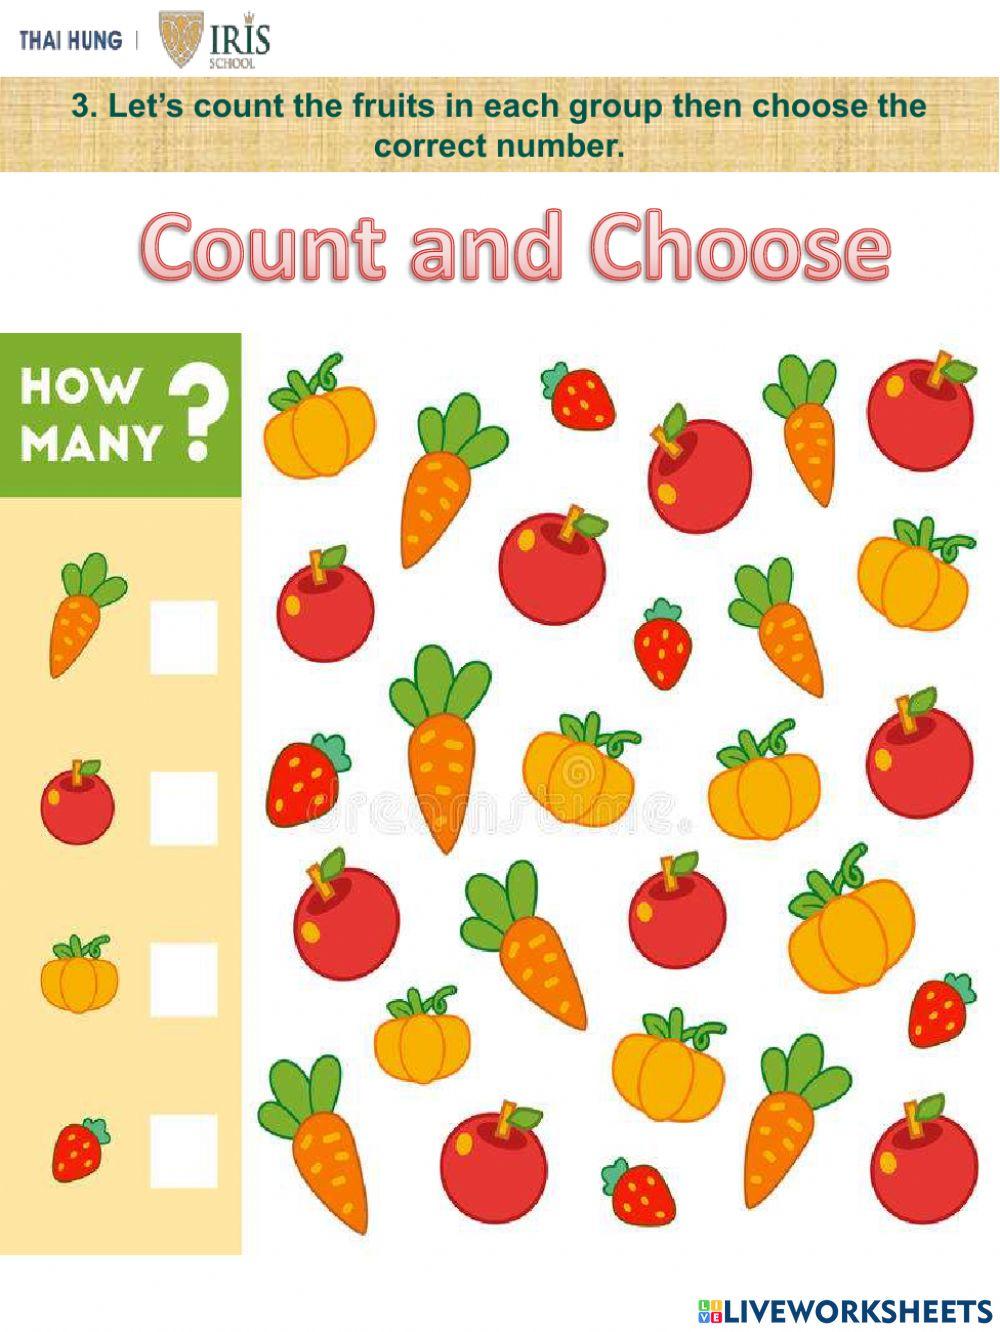 Rainbow:Worksheet about Counting to 10